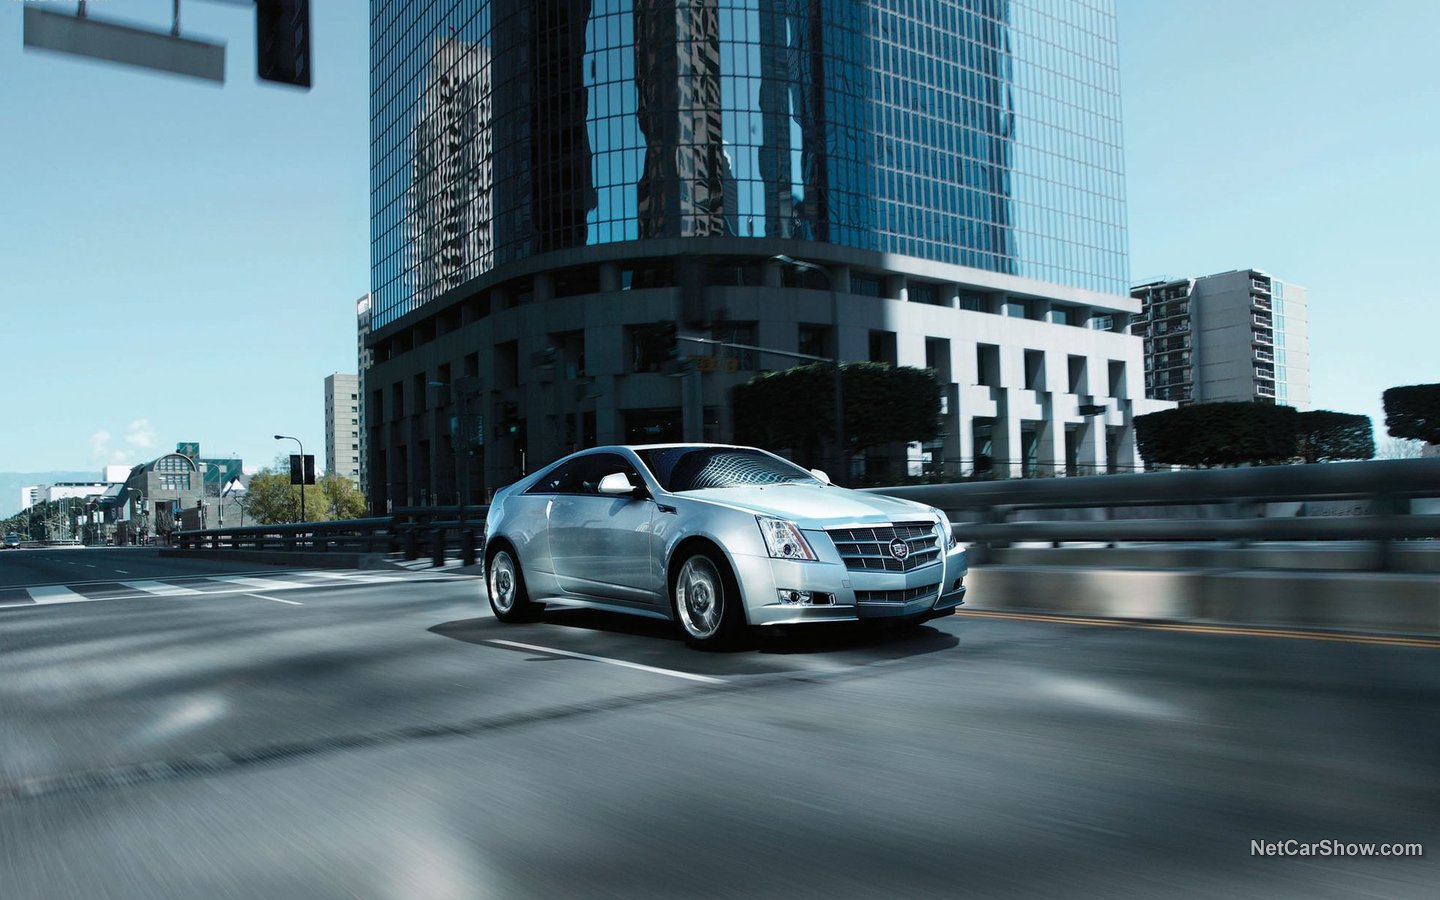 Cadillac CTS Coupe 2011 04b03a2f